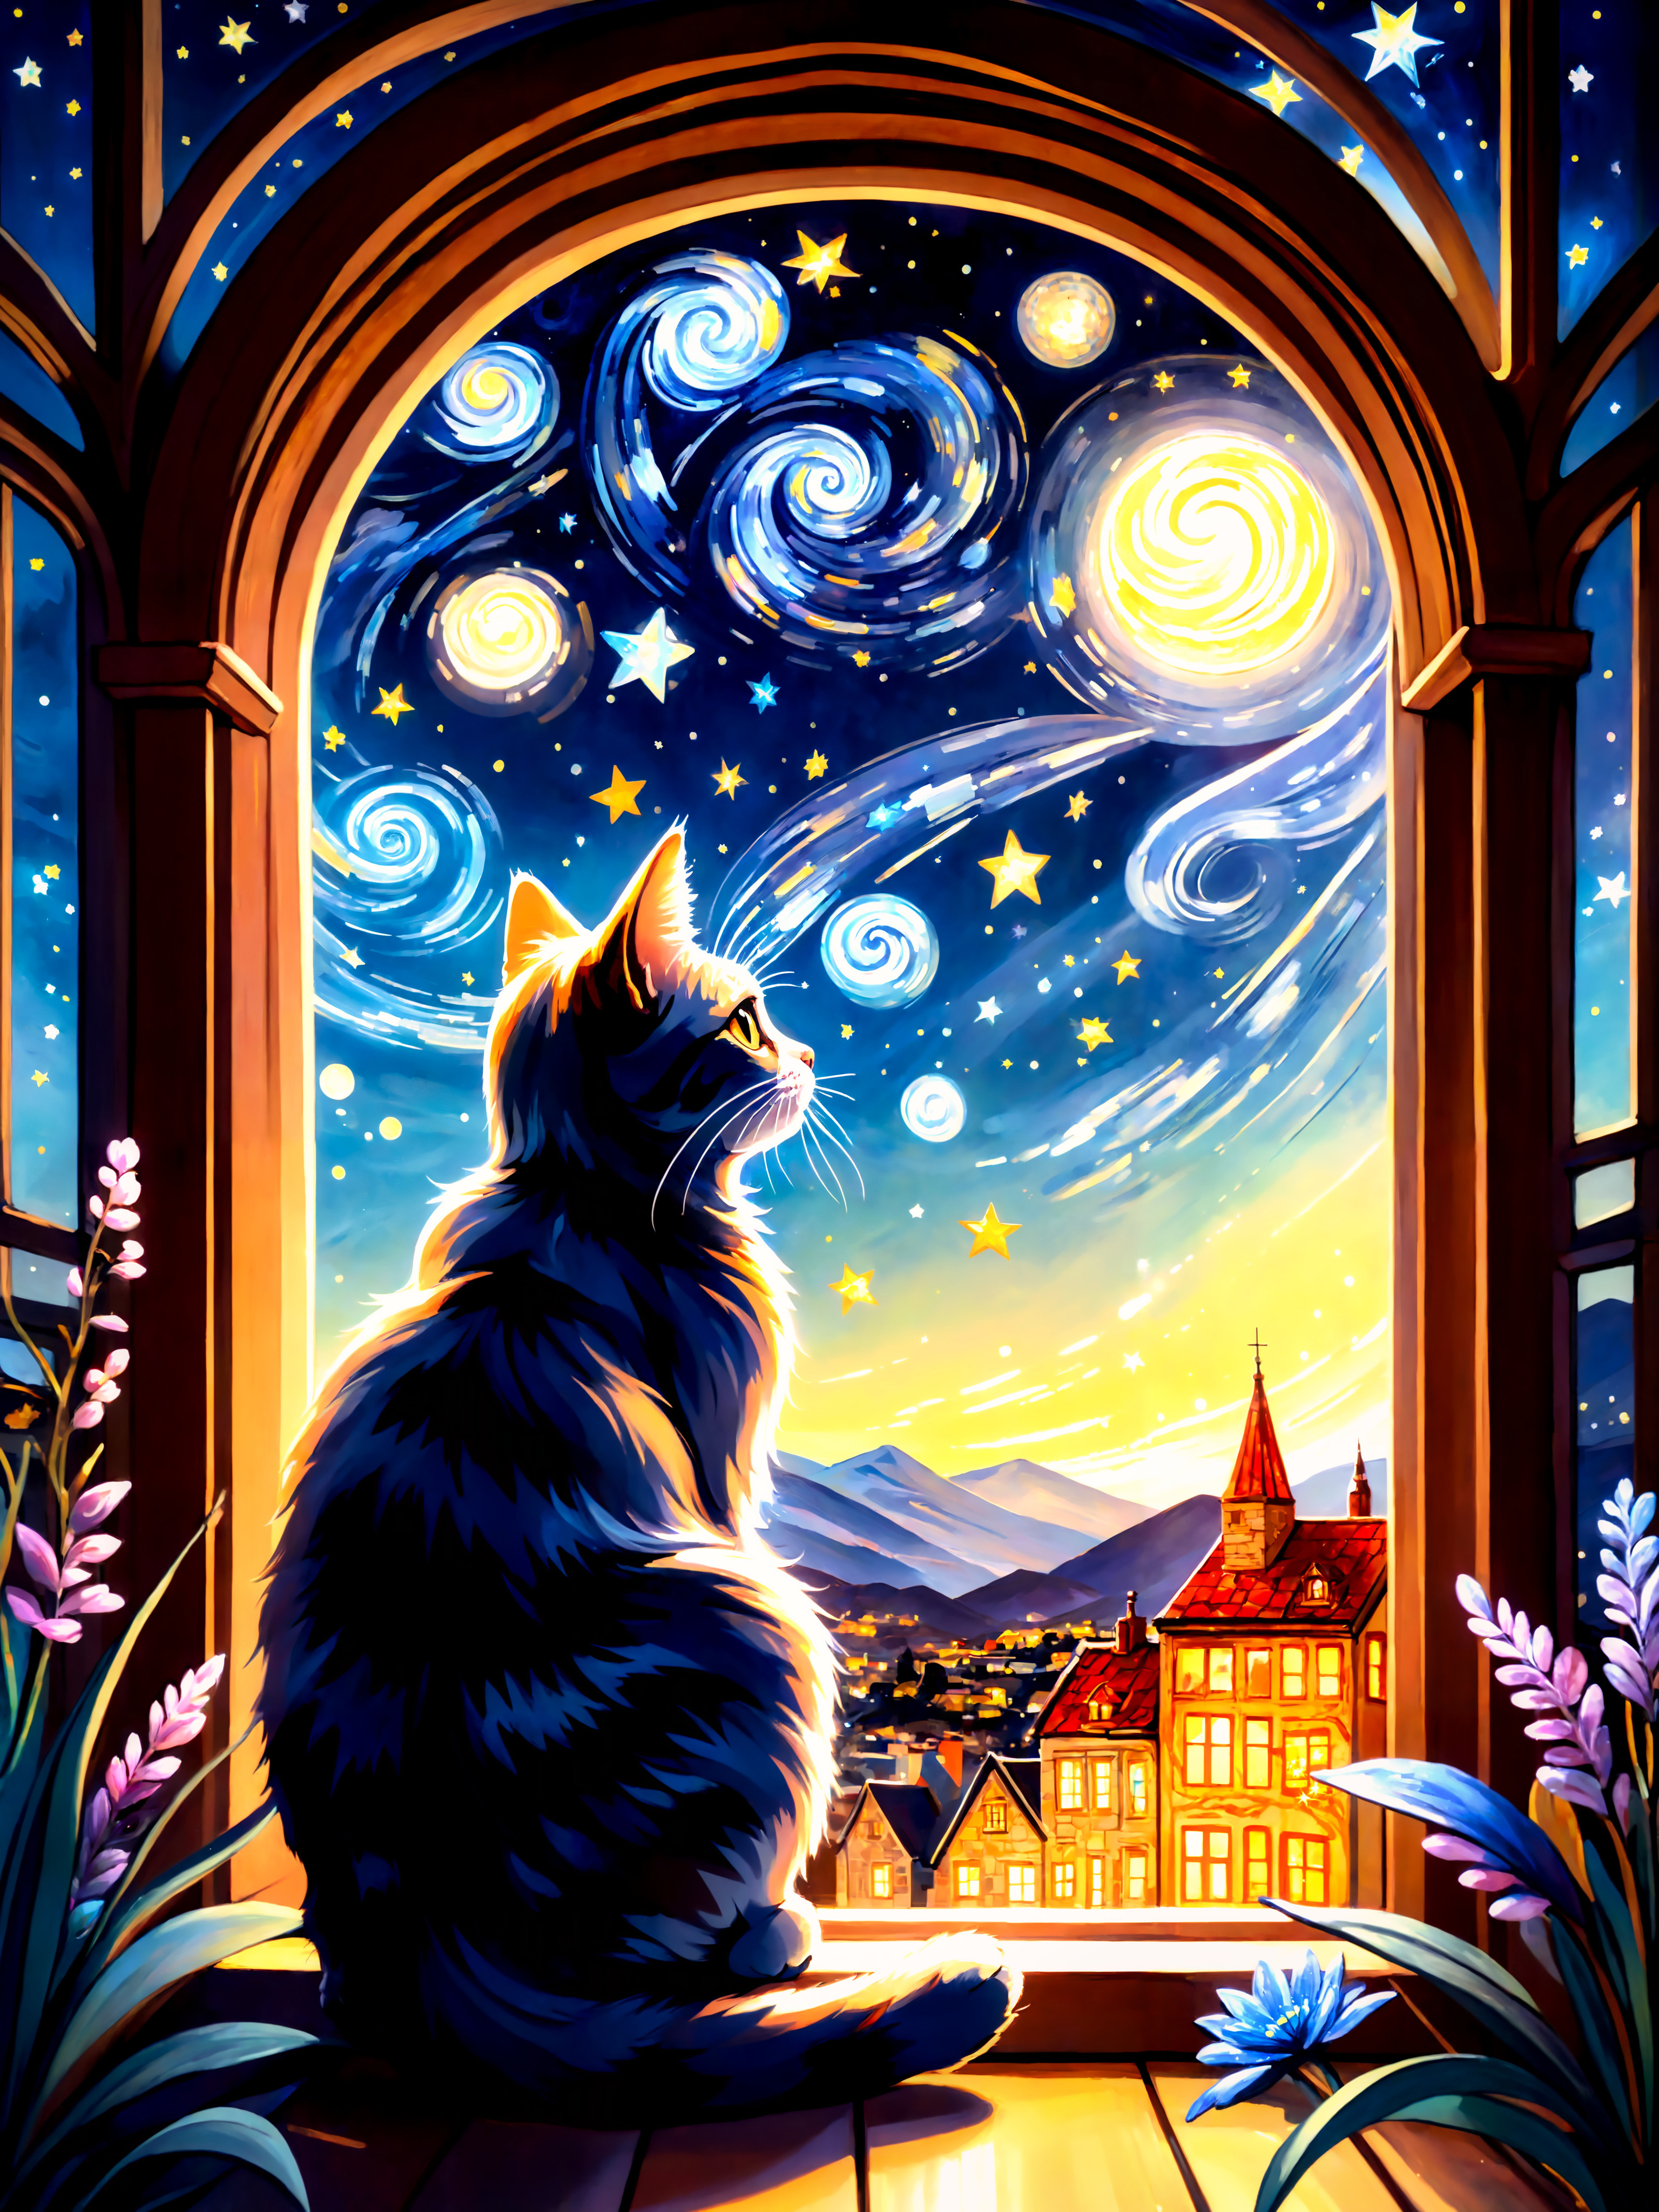 A cat looking at the stars through a window.